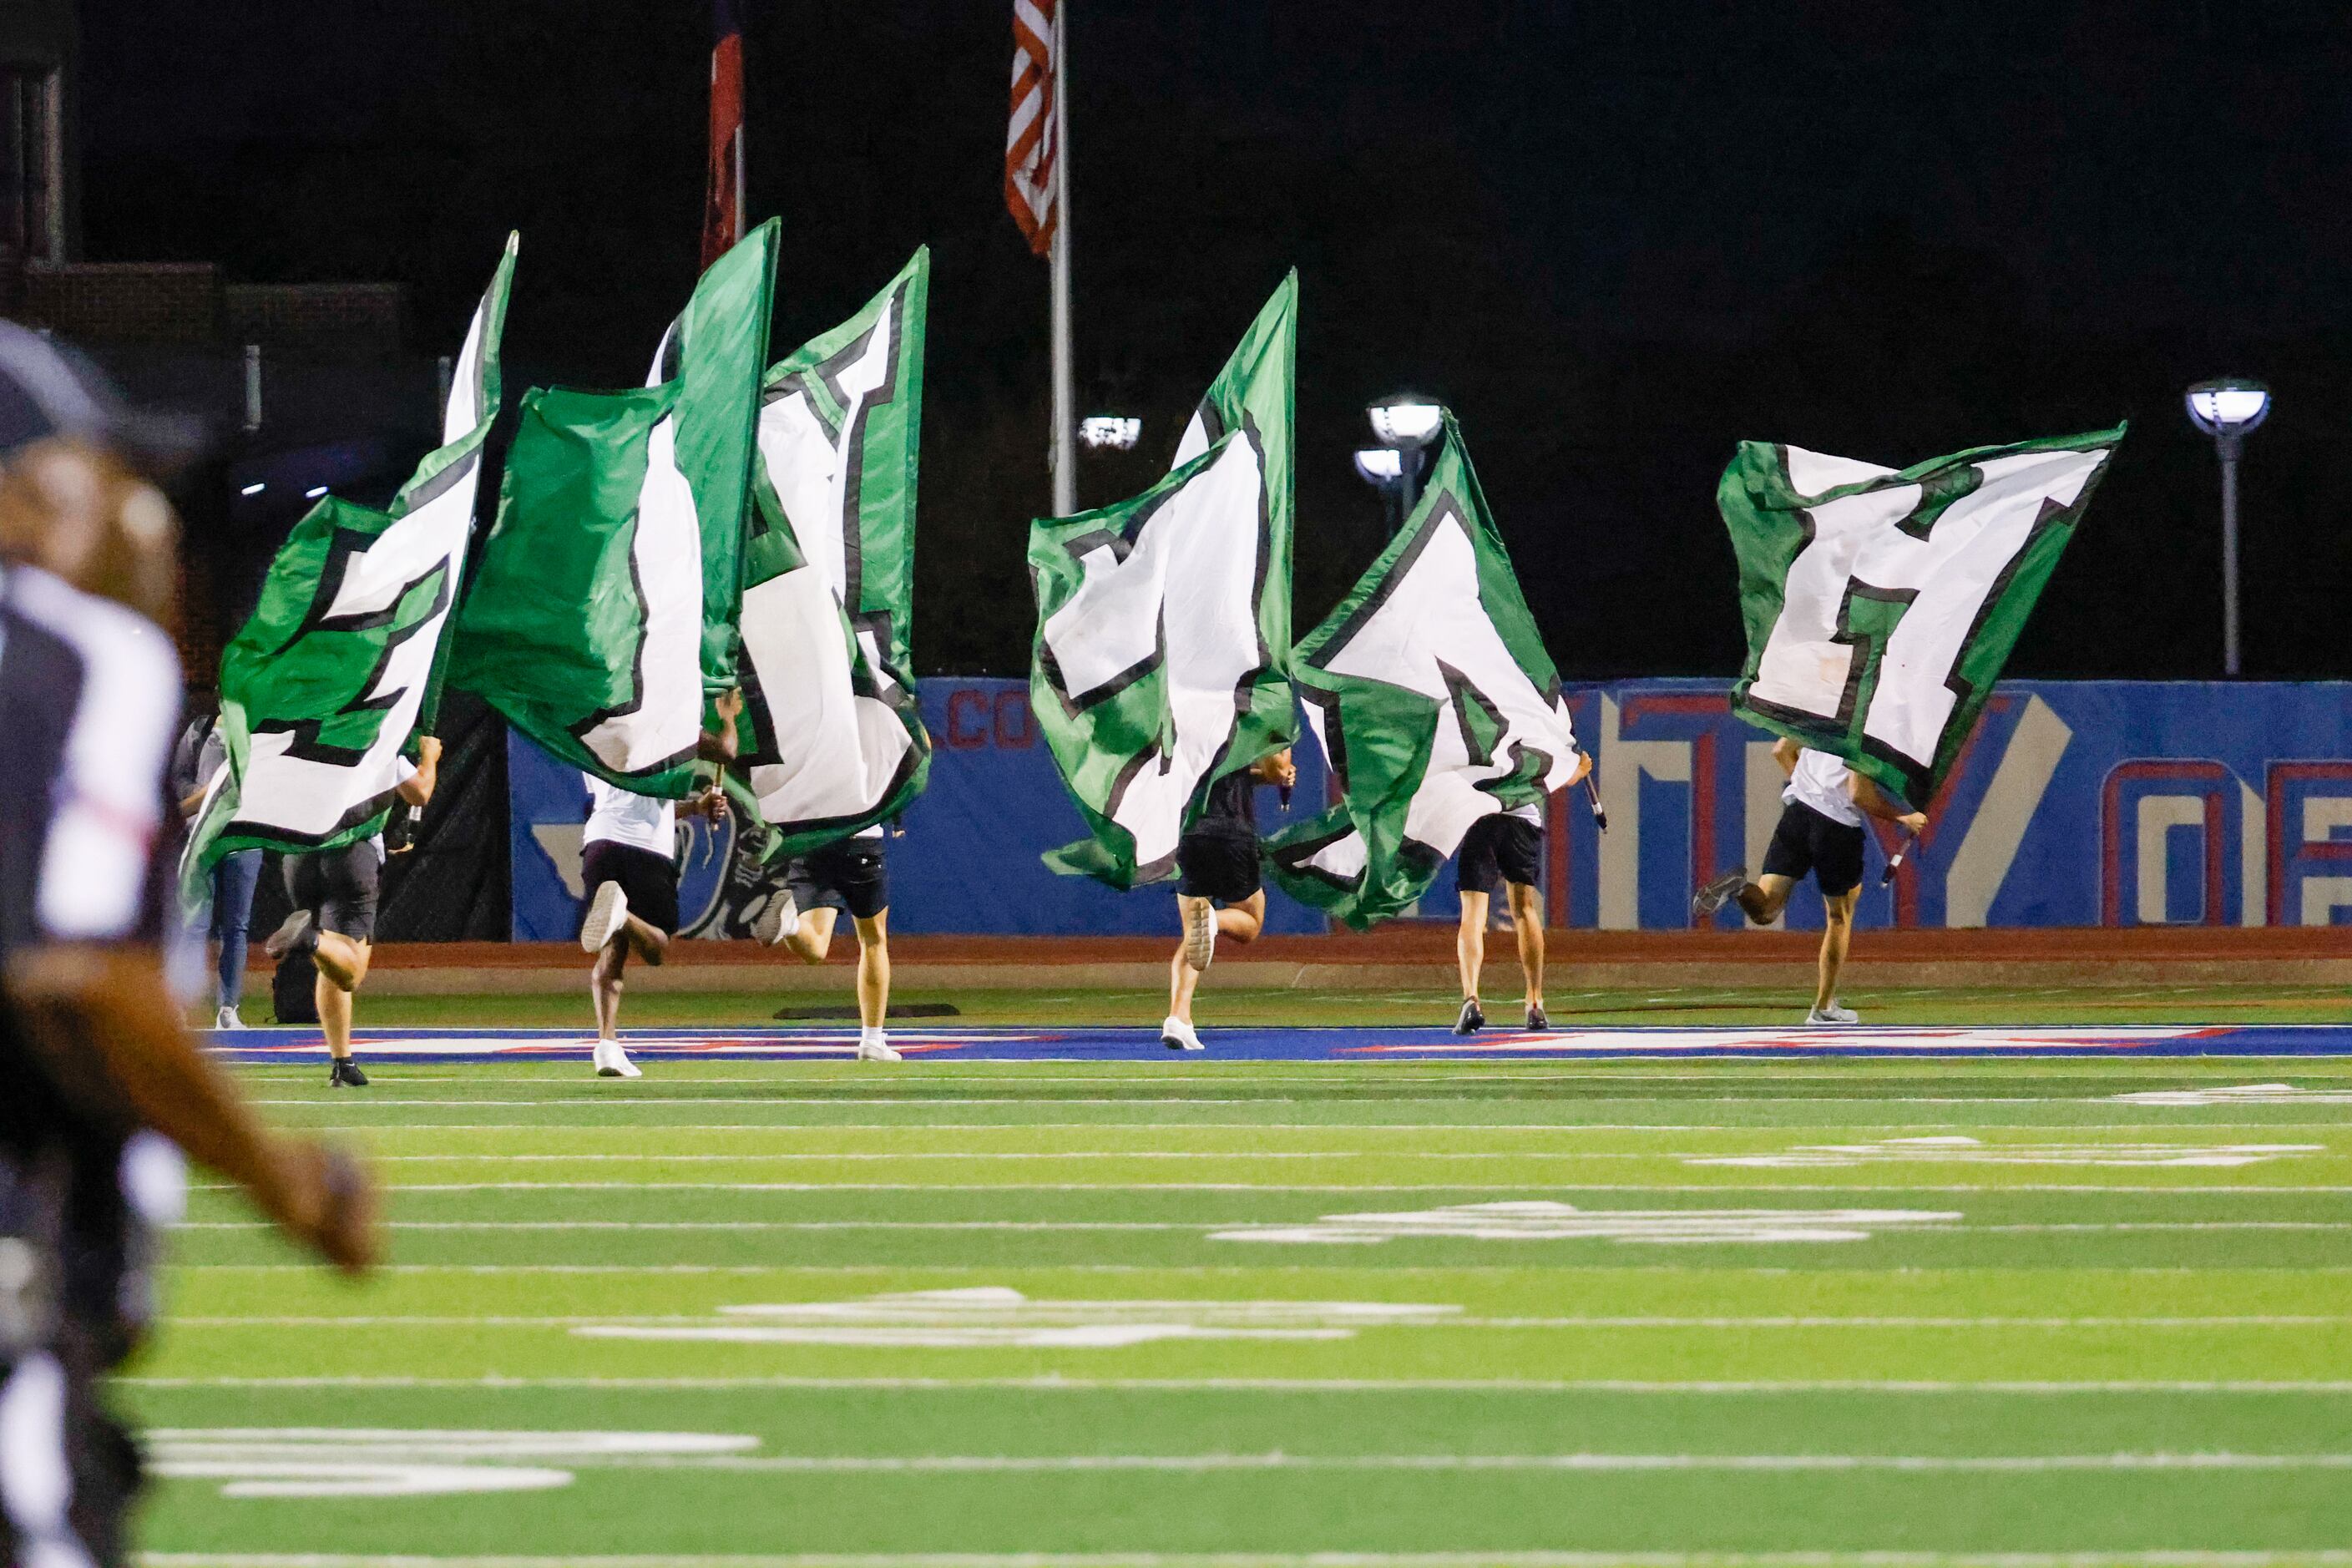 Waxahachie students run the line in celebration of the first touchdown in a game against...